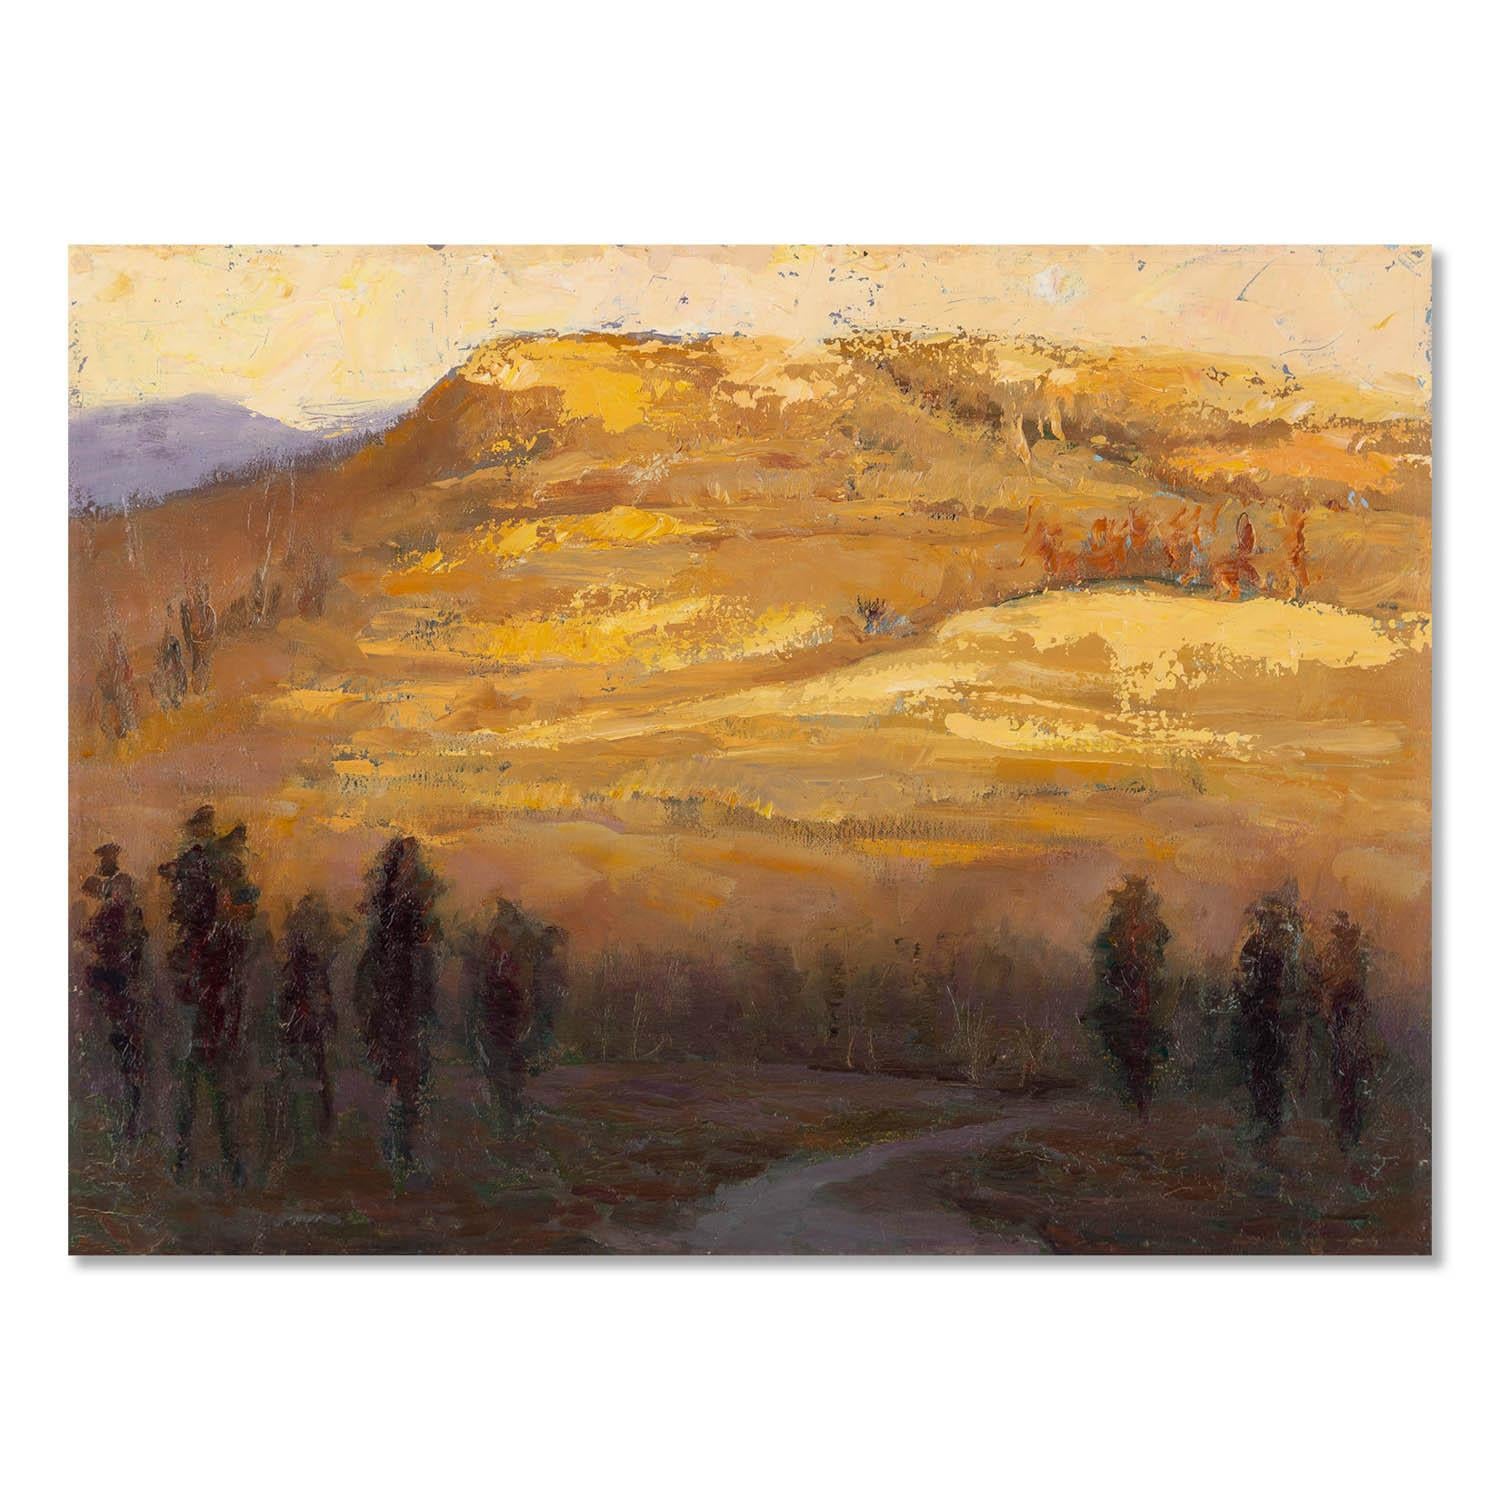 Title: Autumn Charms Of the Grassland 1
 Medium: Oil on canvas
 Size: 12 x 15 inches
 Frame: Framing options available!
 Condition: The painting appears to be in excellent condition.
 
 Year: 2000 Circa
 Artist: Ting Hao
 Signature: Signed
